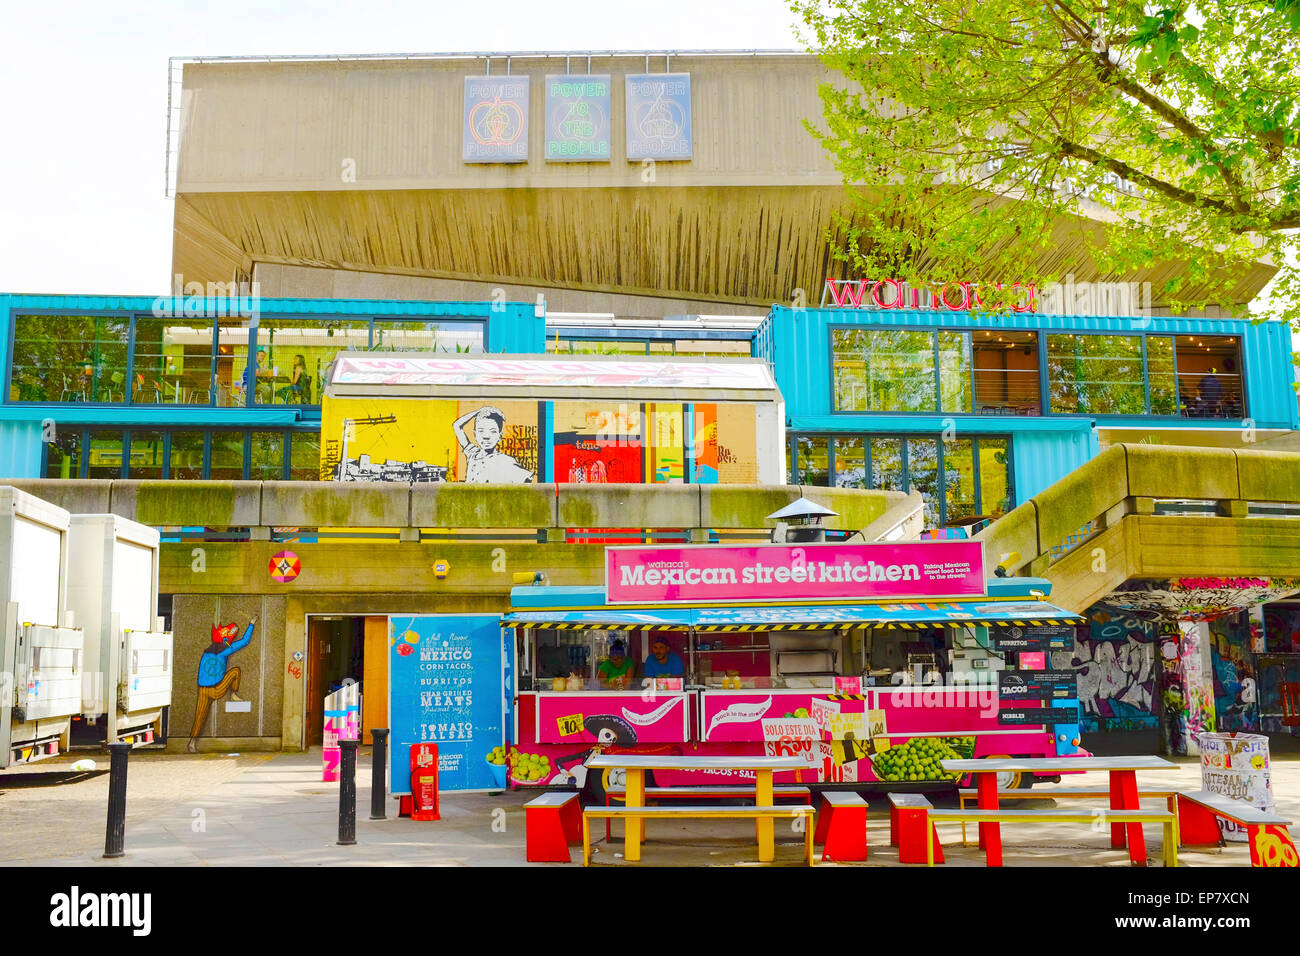 Mexican Street Kitchen next to The National Theatre - South Bank - London Stock Photo